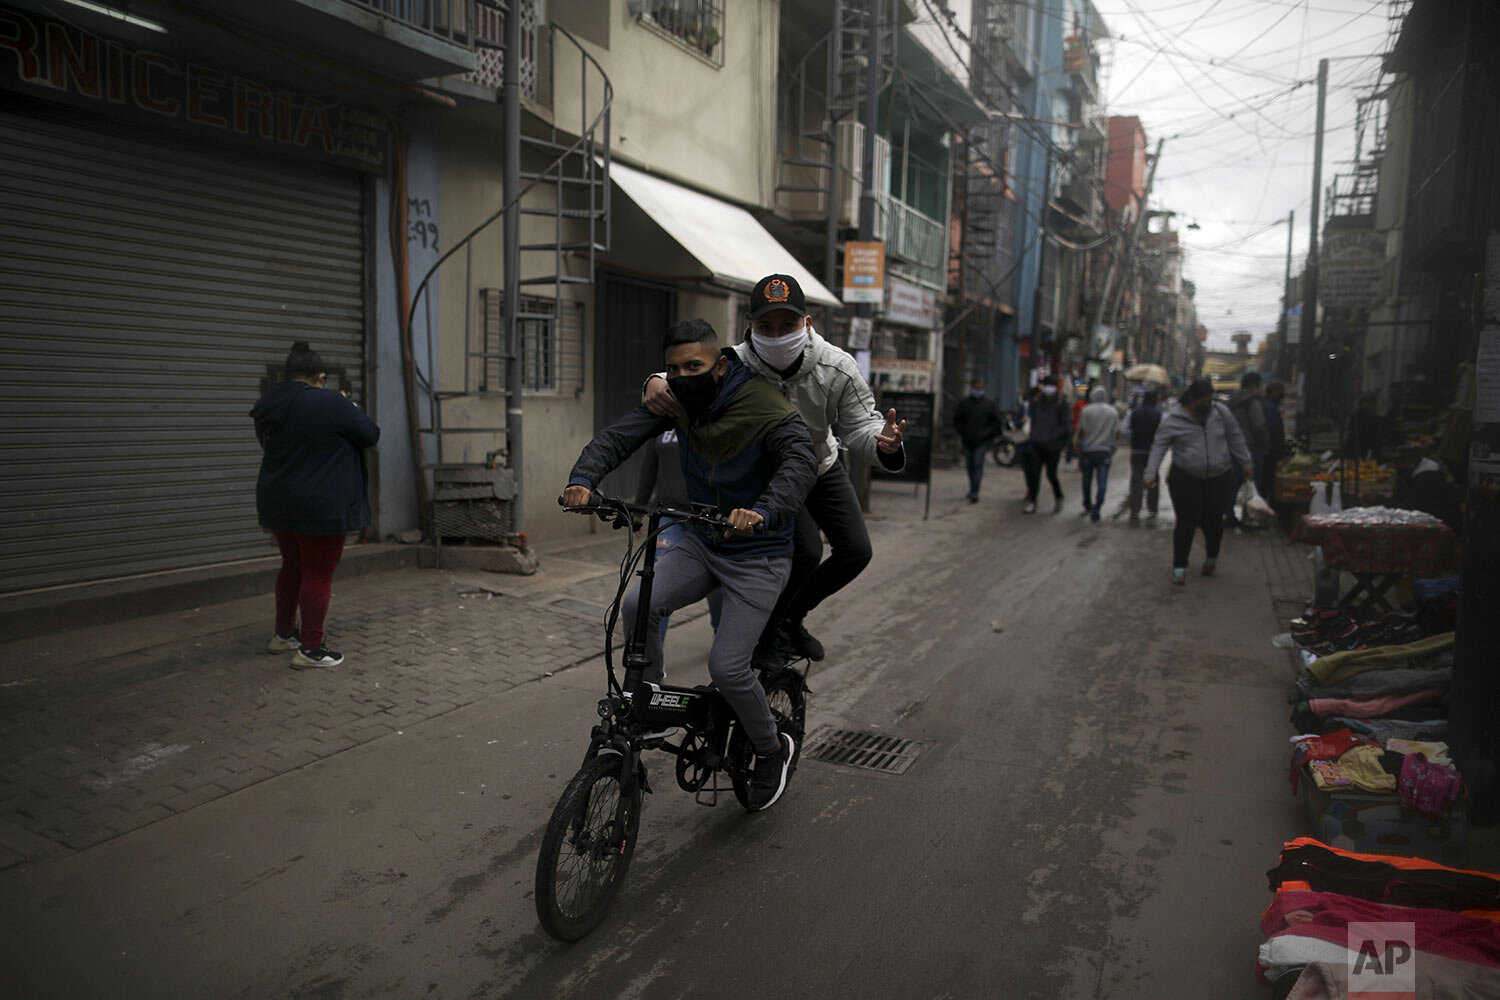  Youths ride a bicycle through "Villa 31" in Buenos Aires, Argentina, Wednesday, May 6, 2020. (AP Photo/Natacha Pisarenko) 